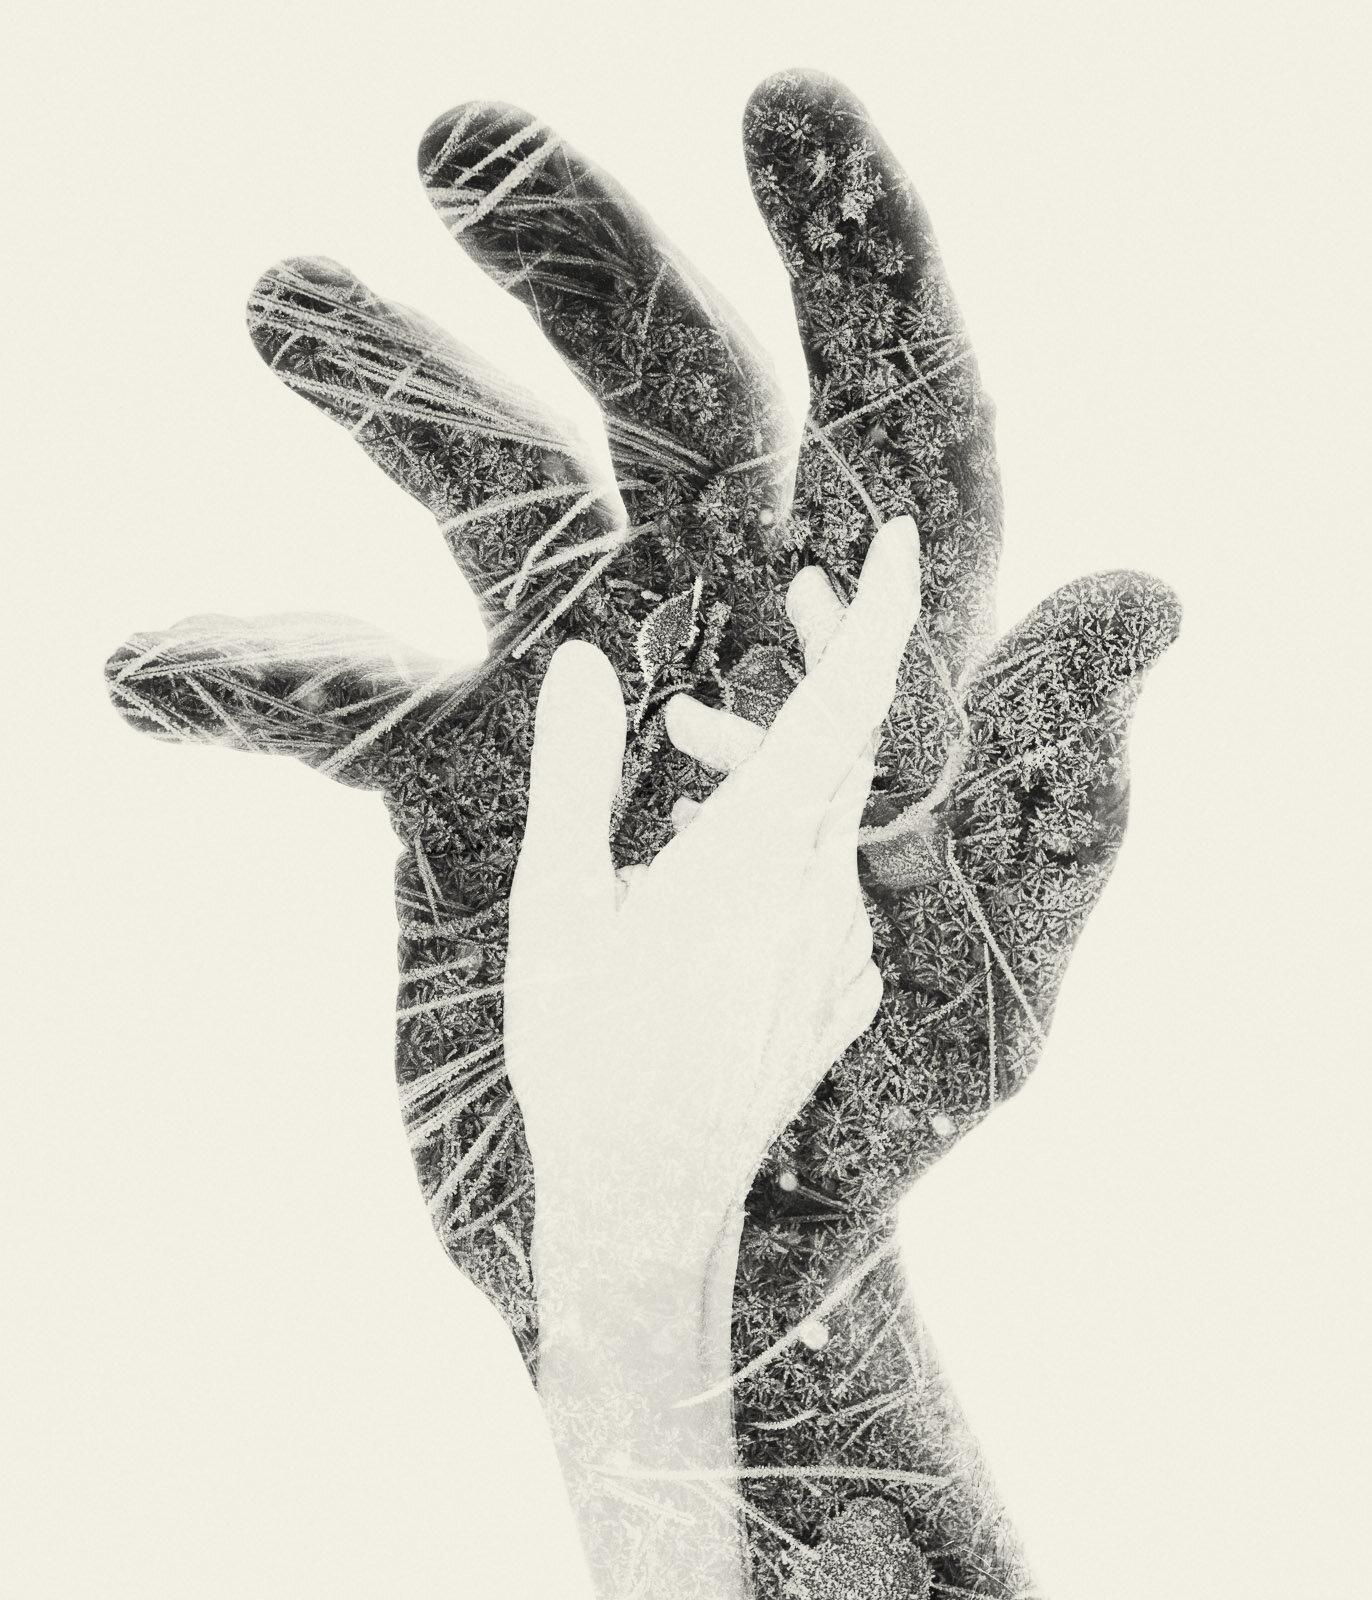 Christoffer Relander Landscape Photograph - First Frost - black and white hands and nature multi exposure photograph